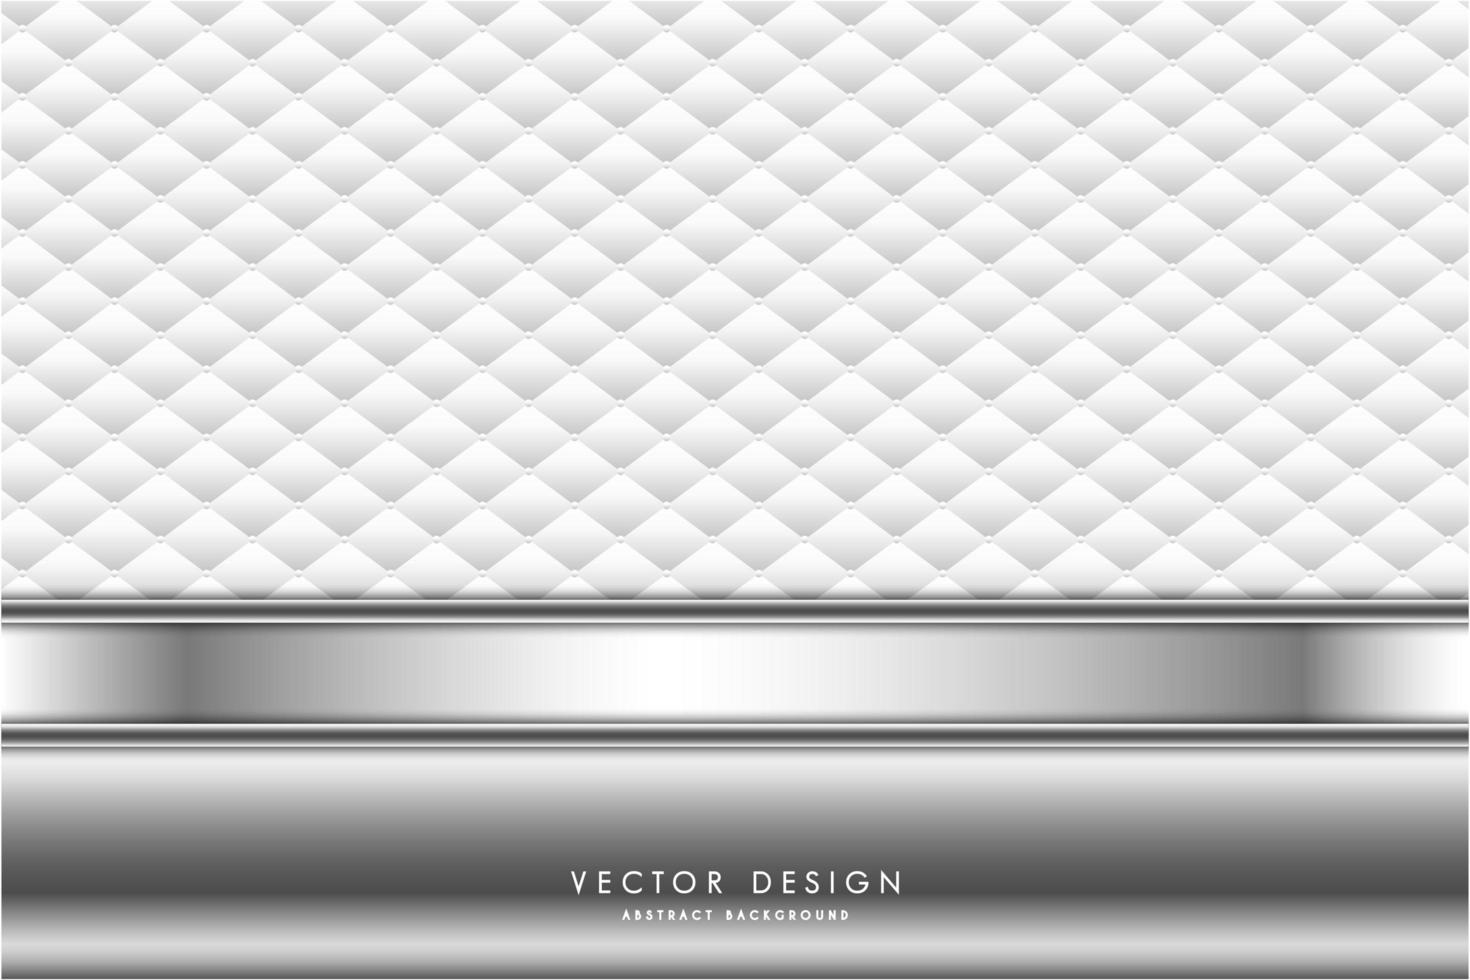 Luxury white and silver metallic background vector